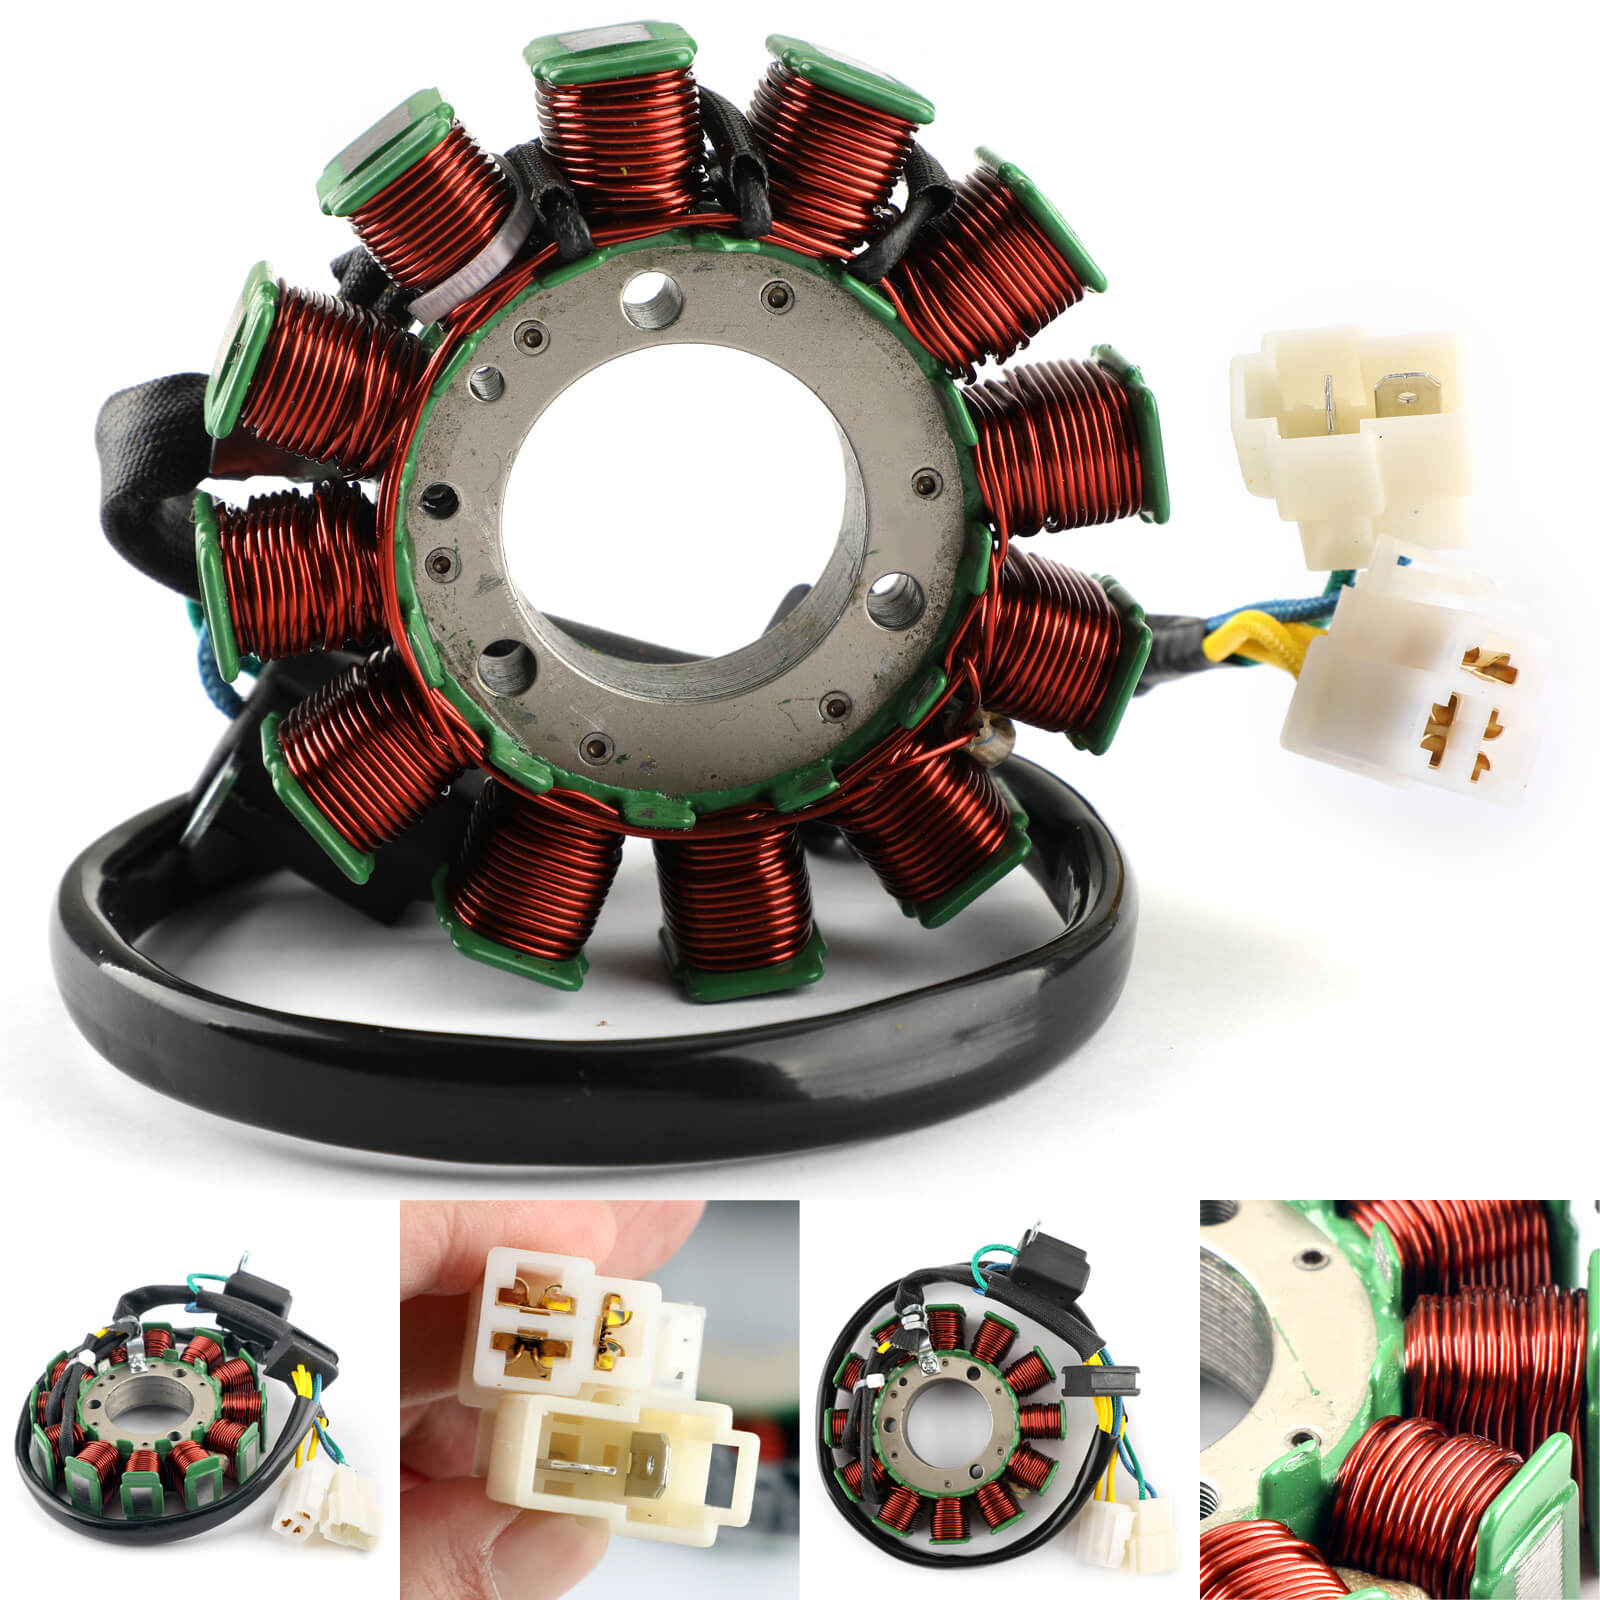 Magneto Generator Engine Stator Coil Fit For Hyosung GV250 GT250 R 2006-2011 GV125 GT125 R 2002-2010